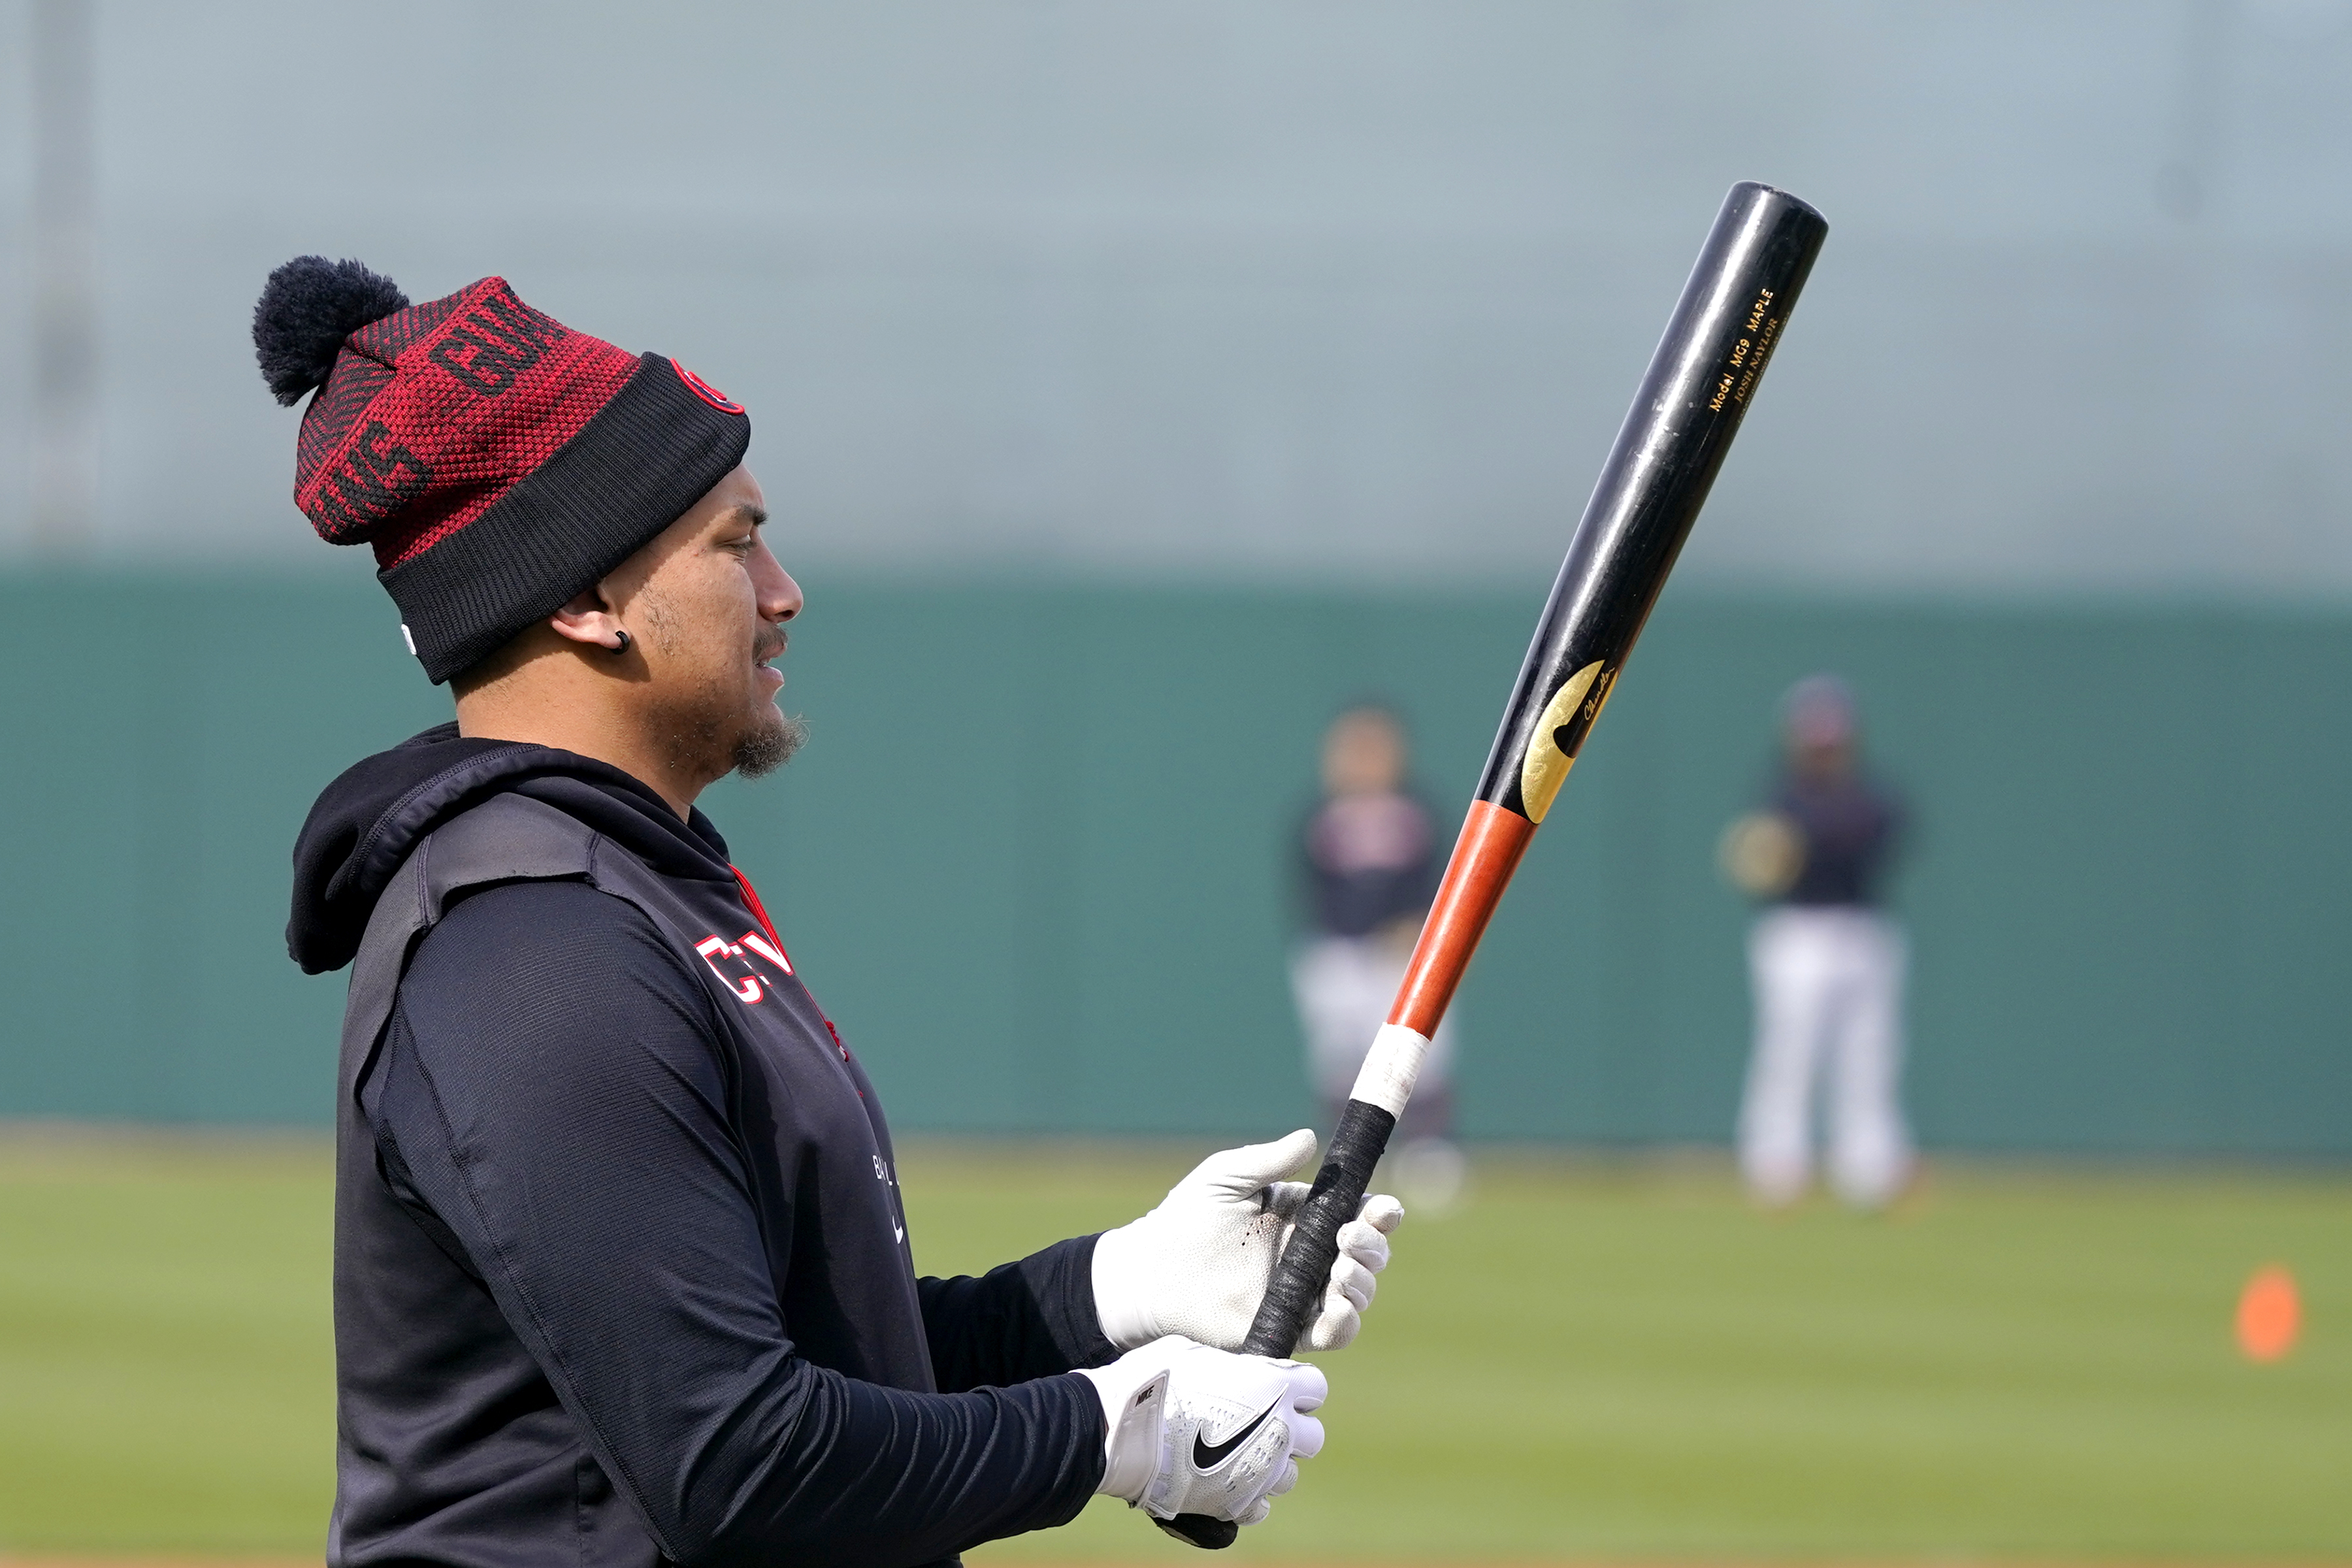 Josh Naylor has rescued the Cleveland Guardians 2023 lineup